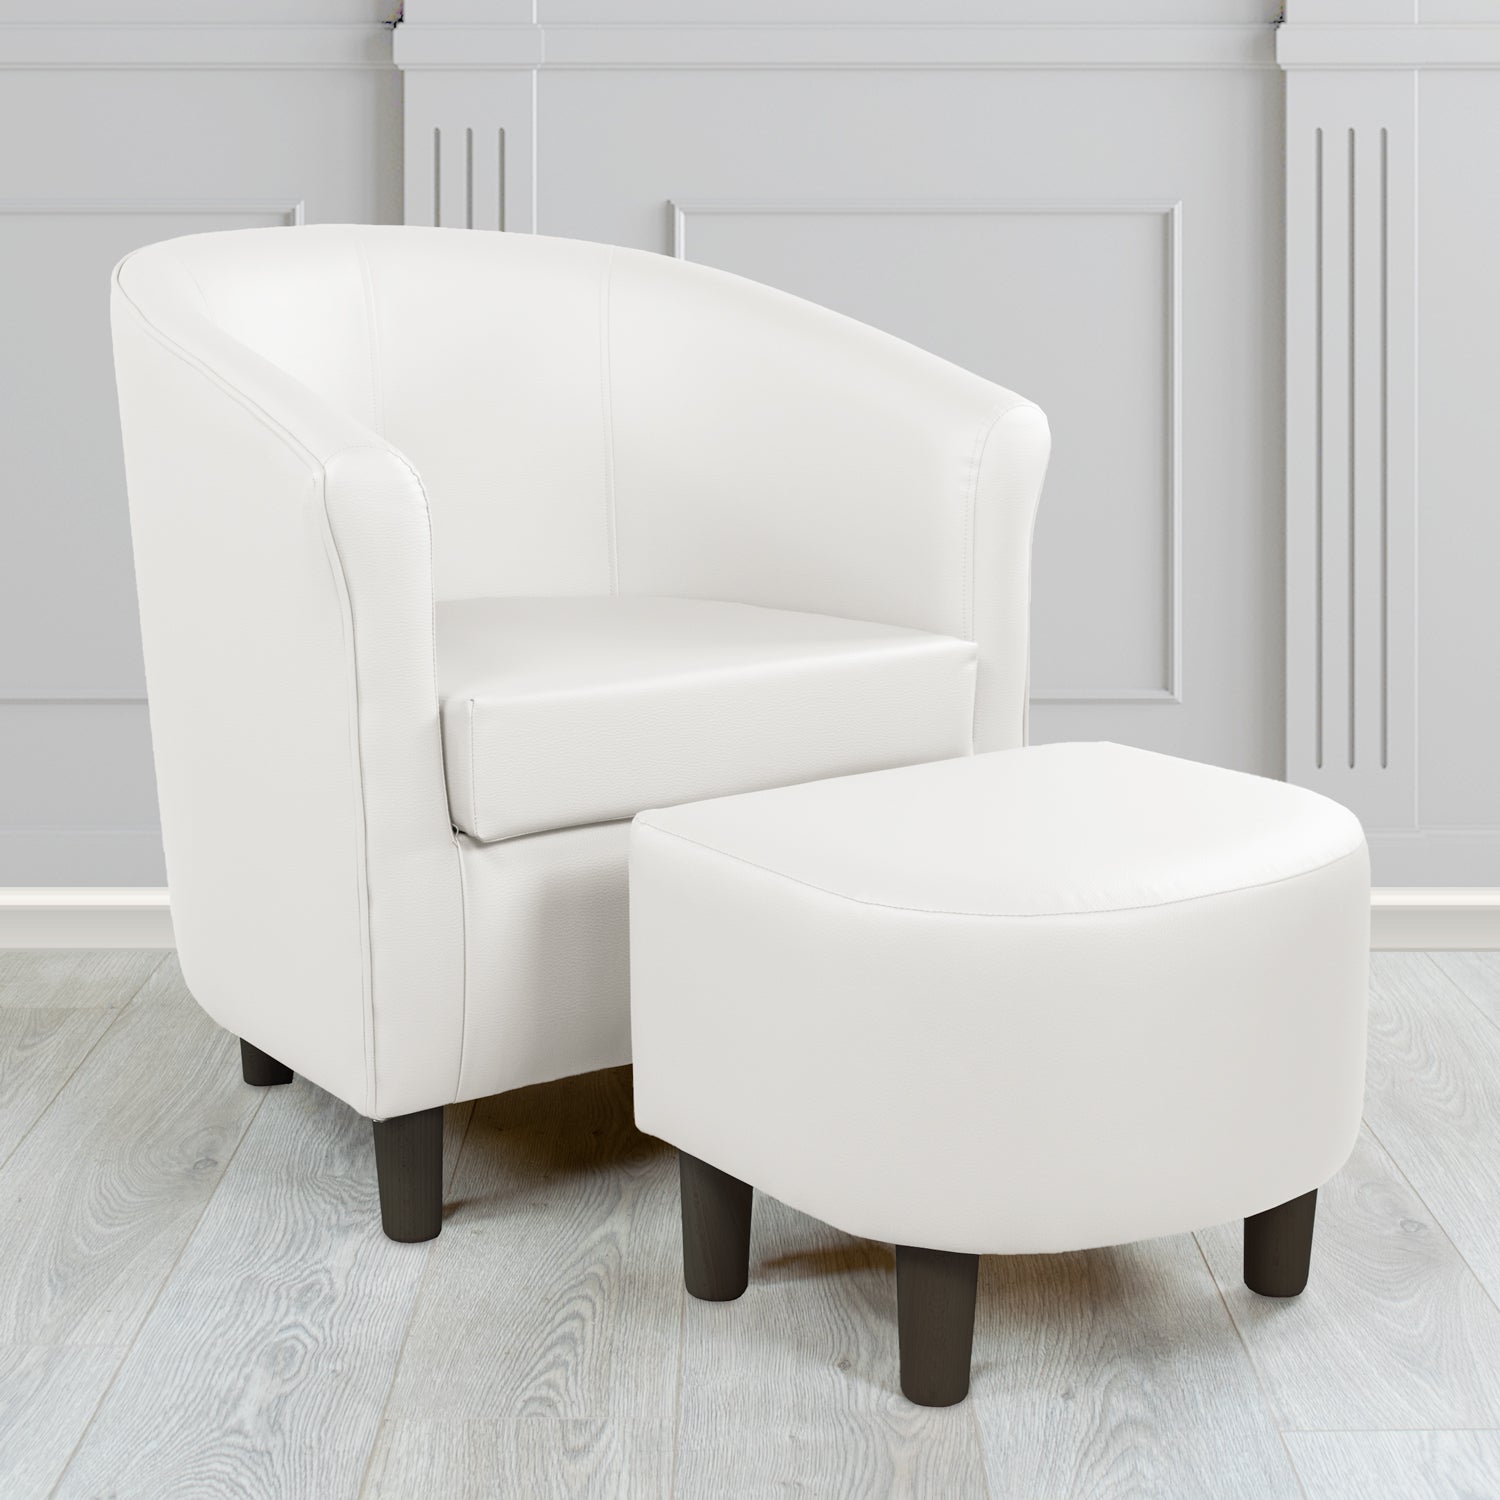 Tuscany Just Colour Jasmine White Faux Leather Tub Chair with Dee Footstool Set - The Tub Chair Shop